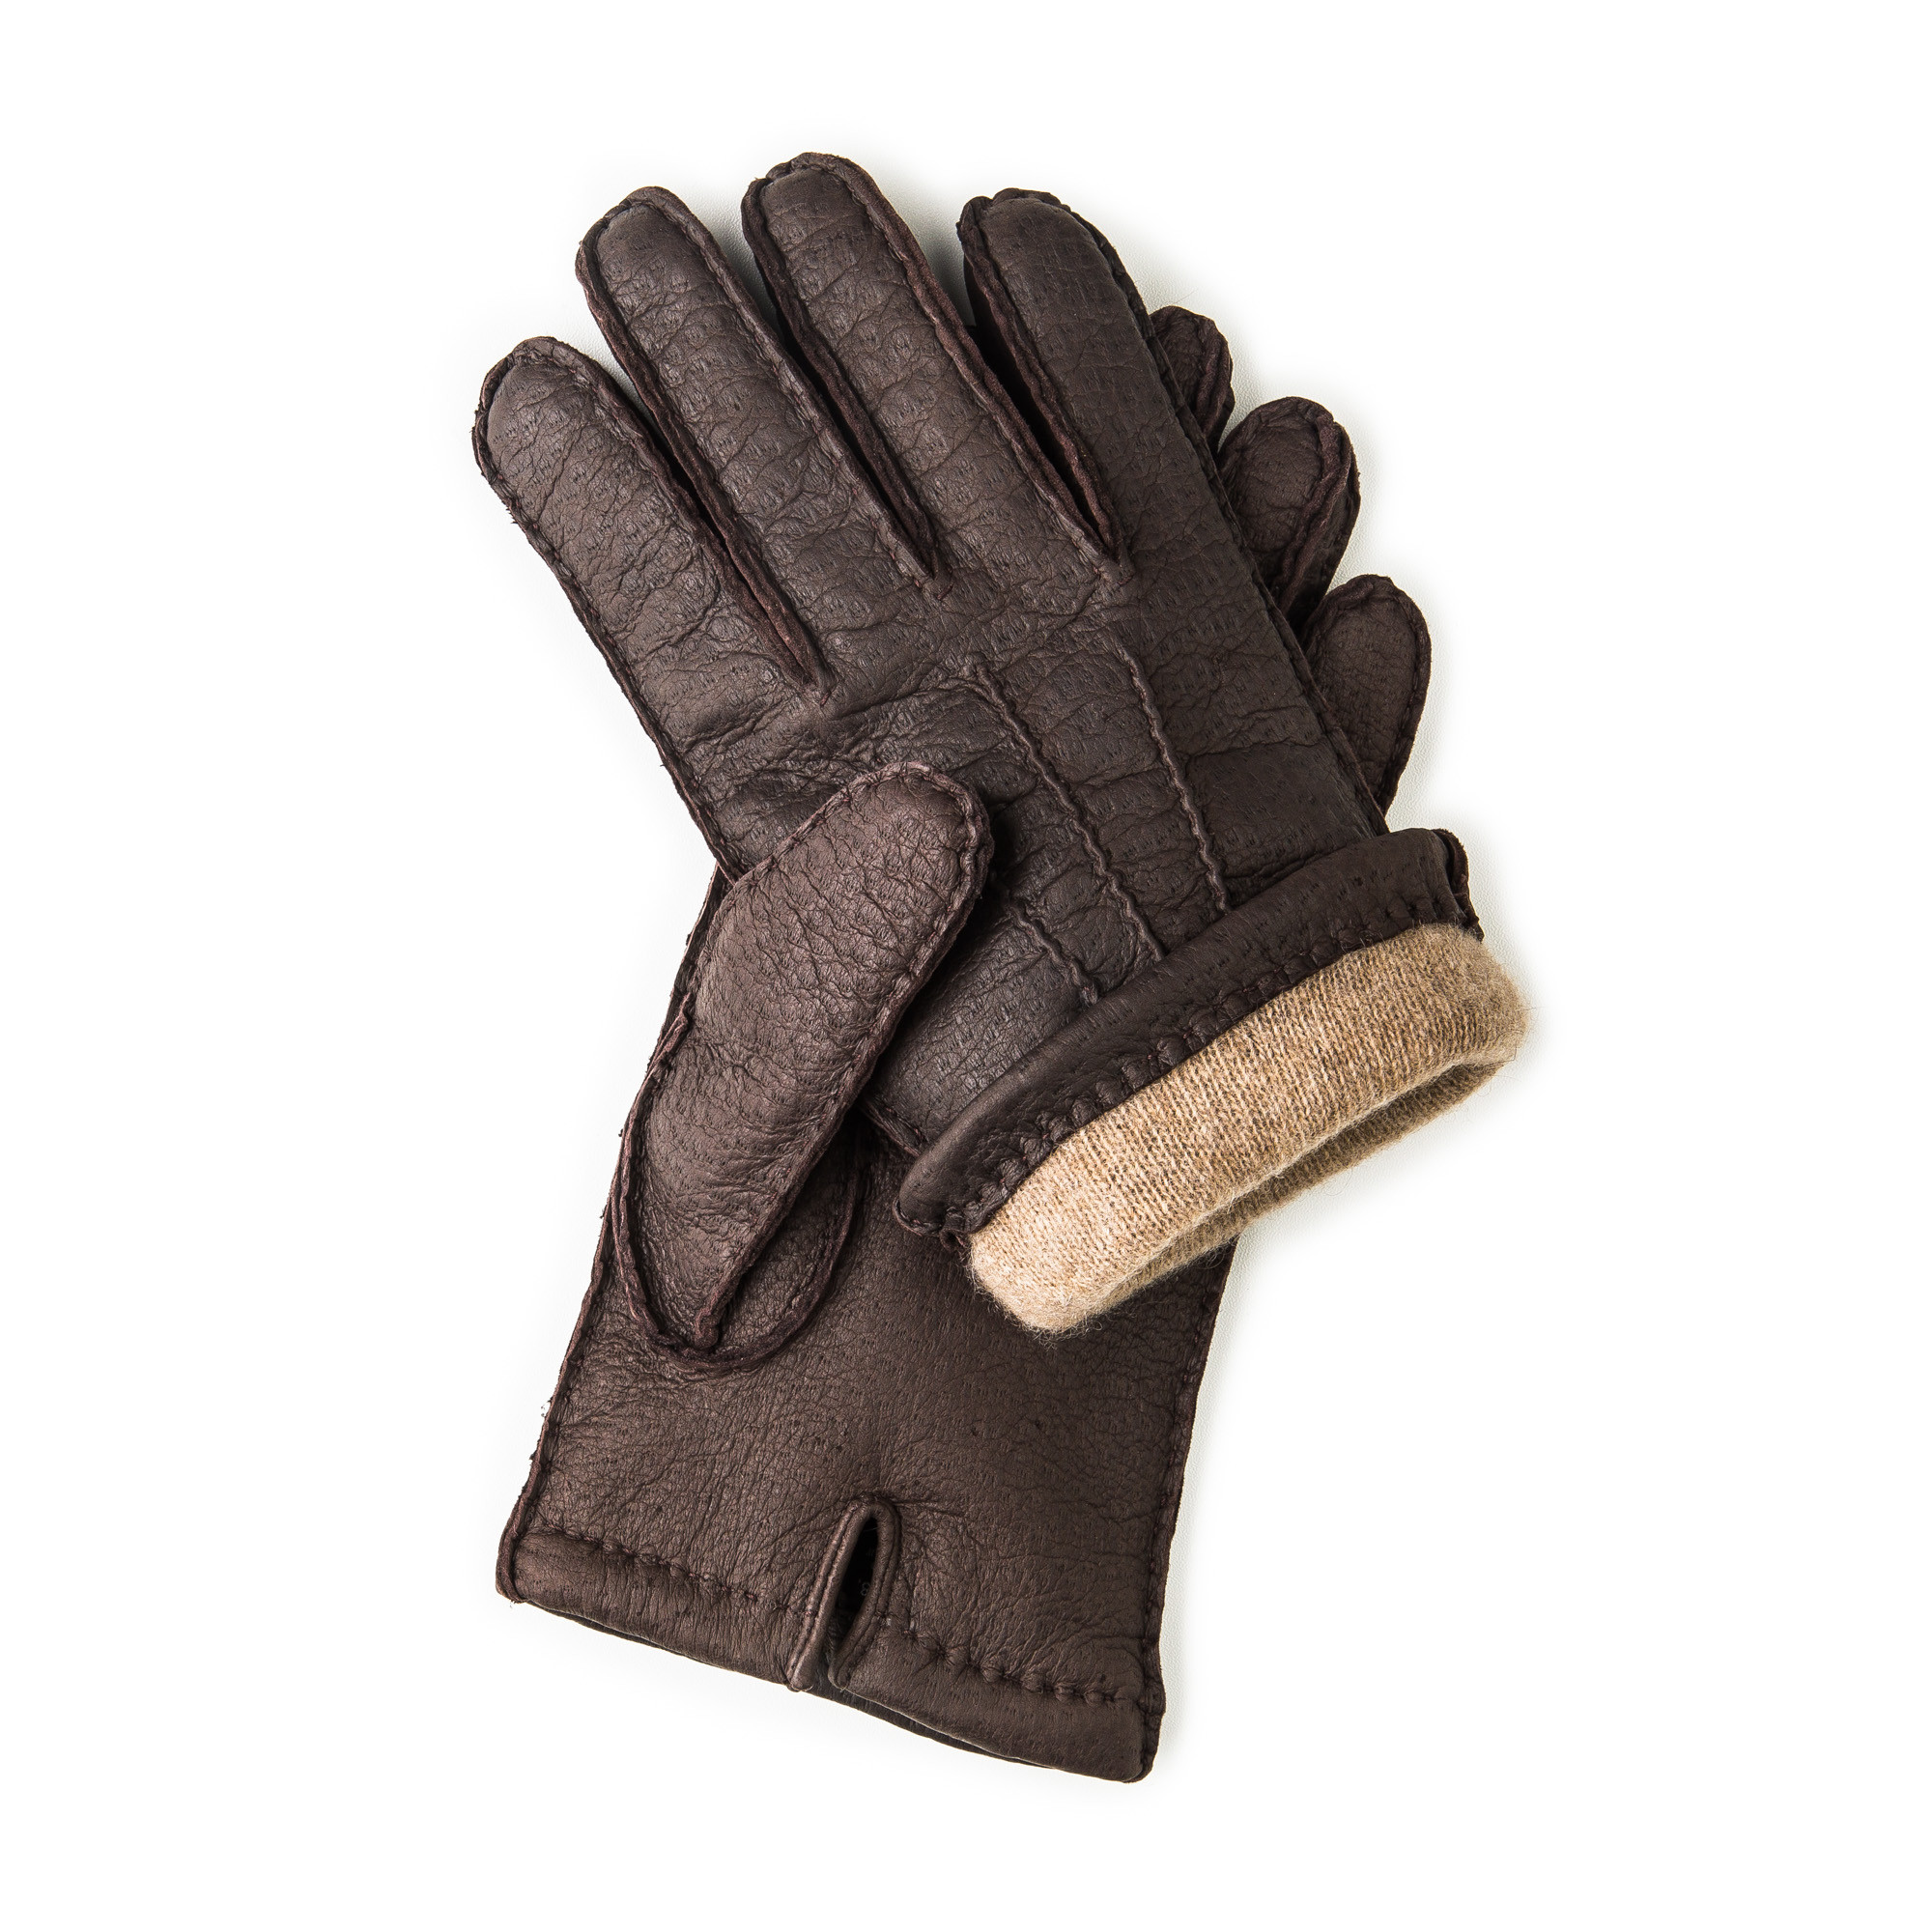 Black Mens Suede And Leather Woven Gloves Cashmere Lined for Men Mens Accessories Gloves 